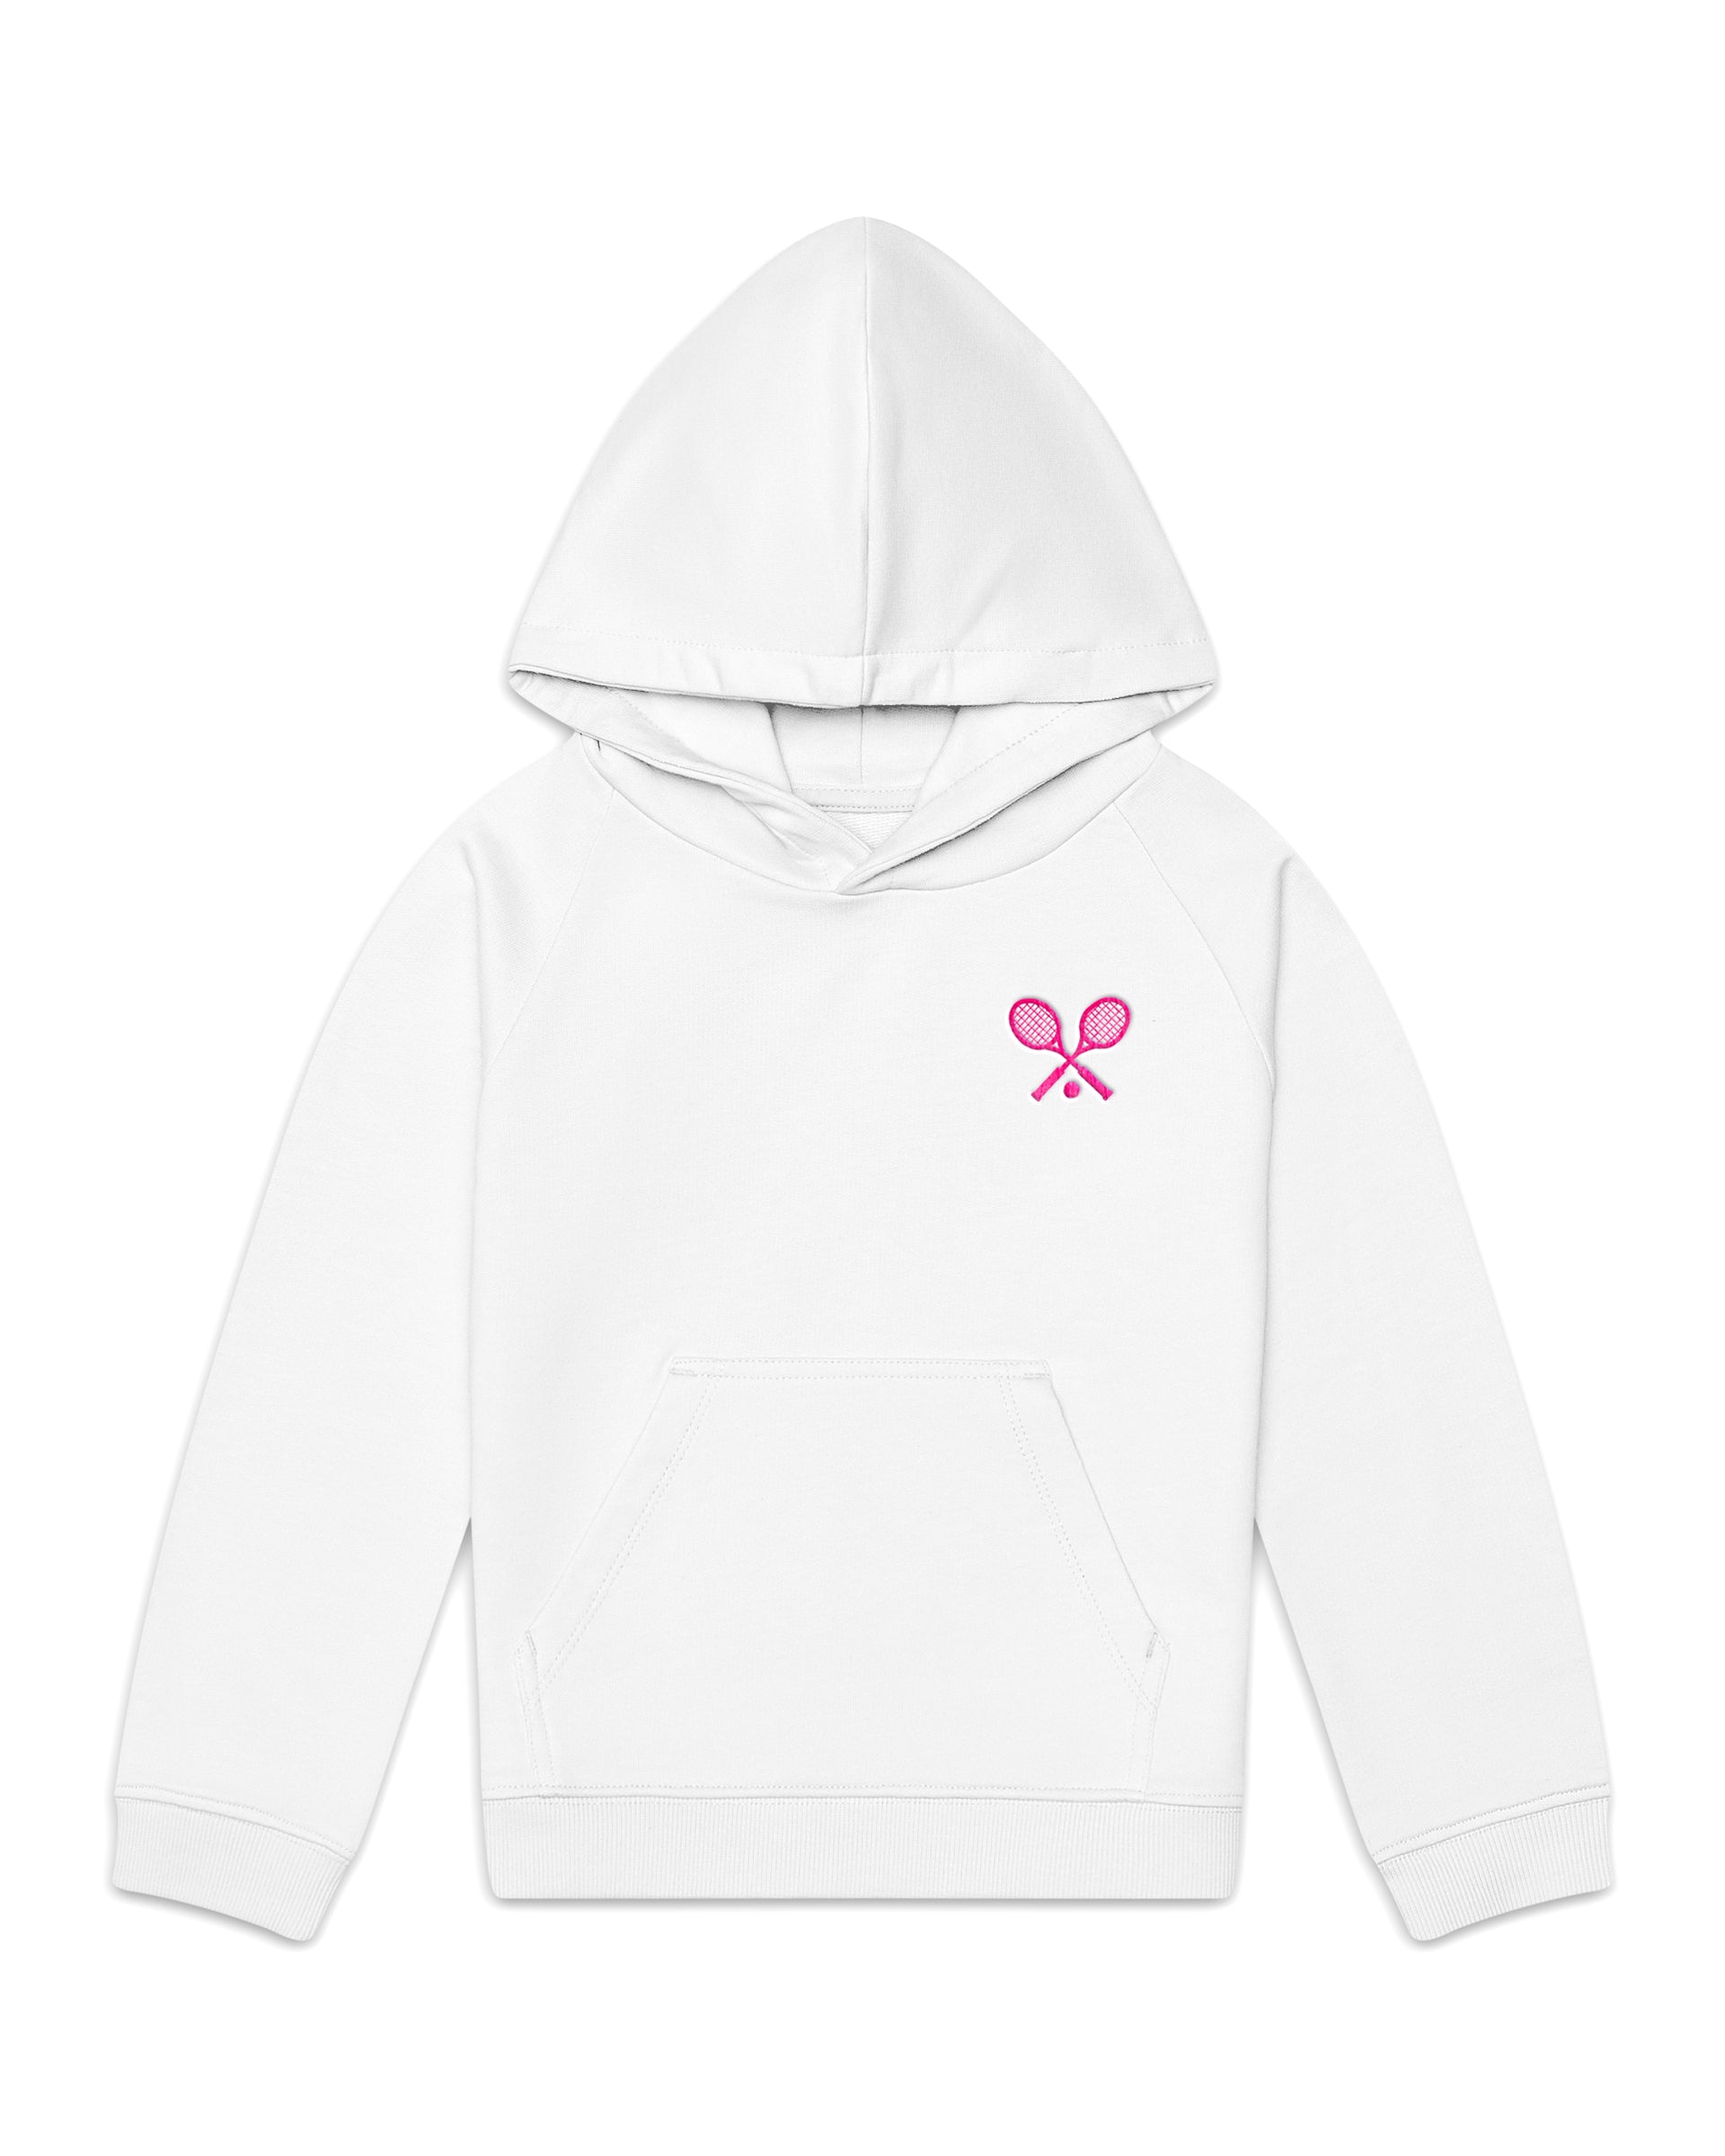 The Organic Embroidered Hoodie Sweatshirt [White with Neon Pink Tennis]